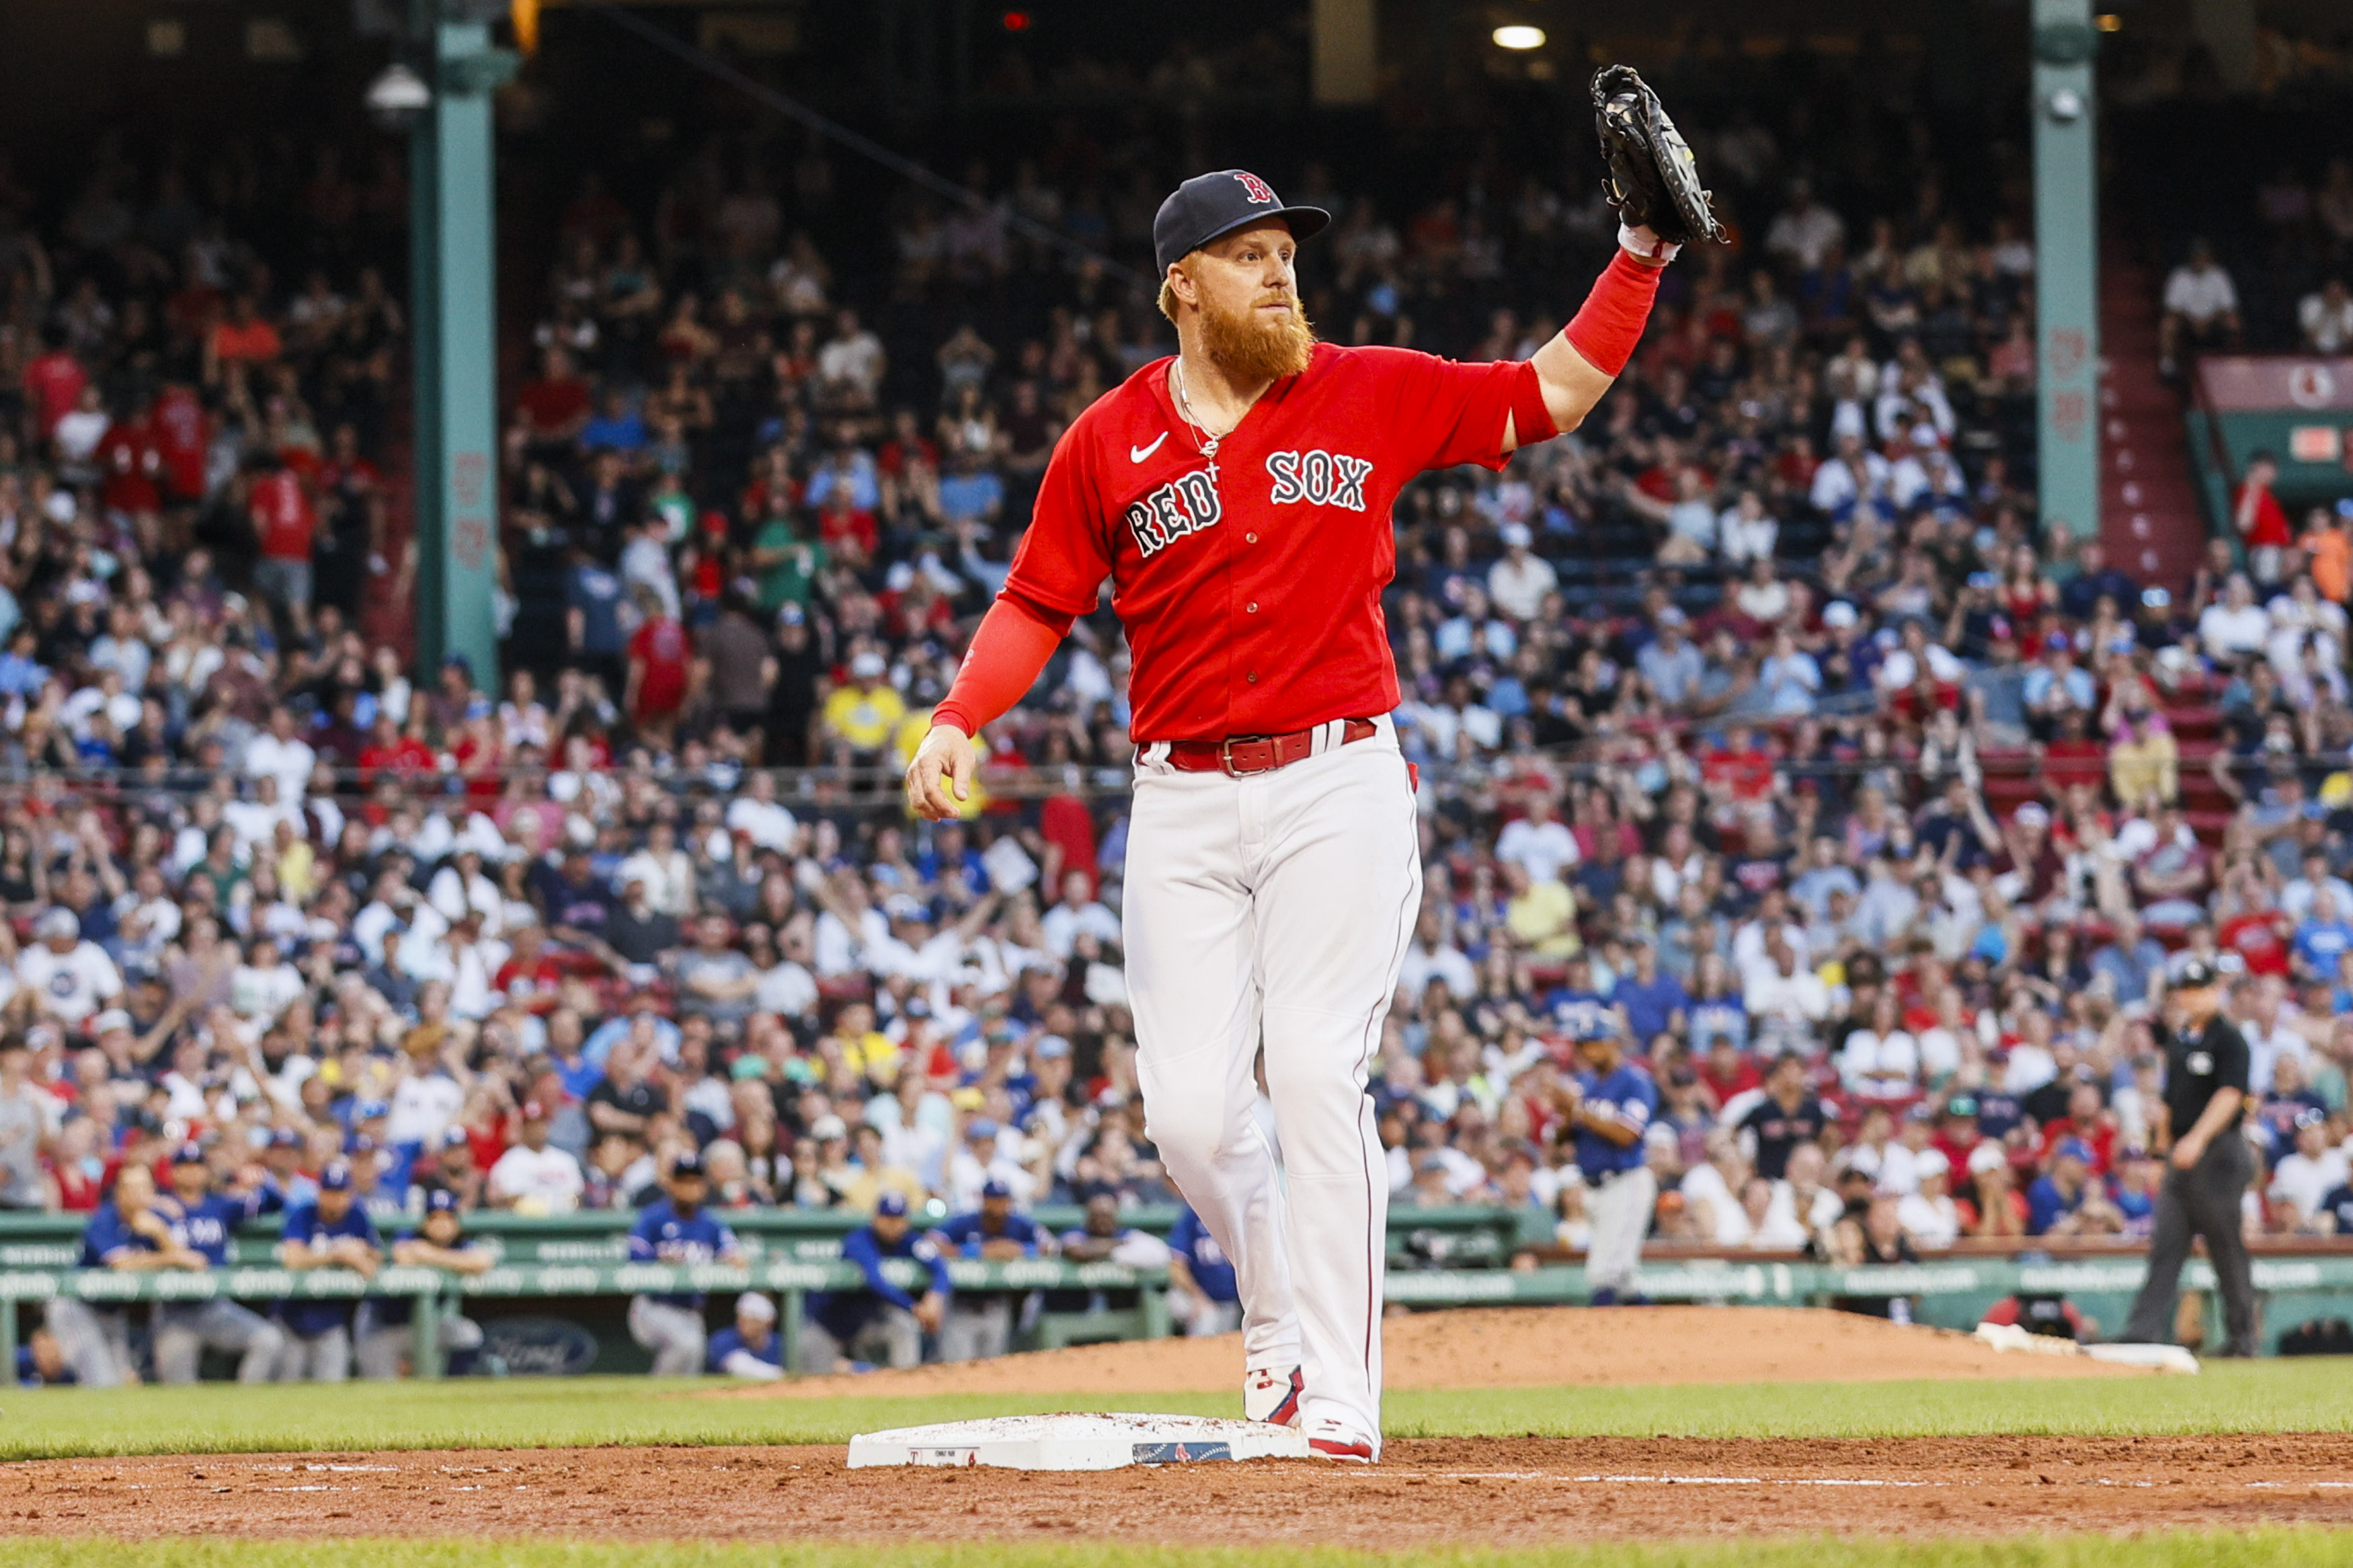 4 takeaways from the Red Sox' 8-1 win over the Twins